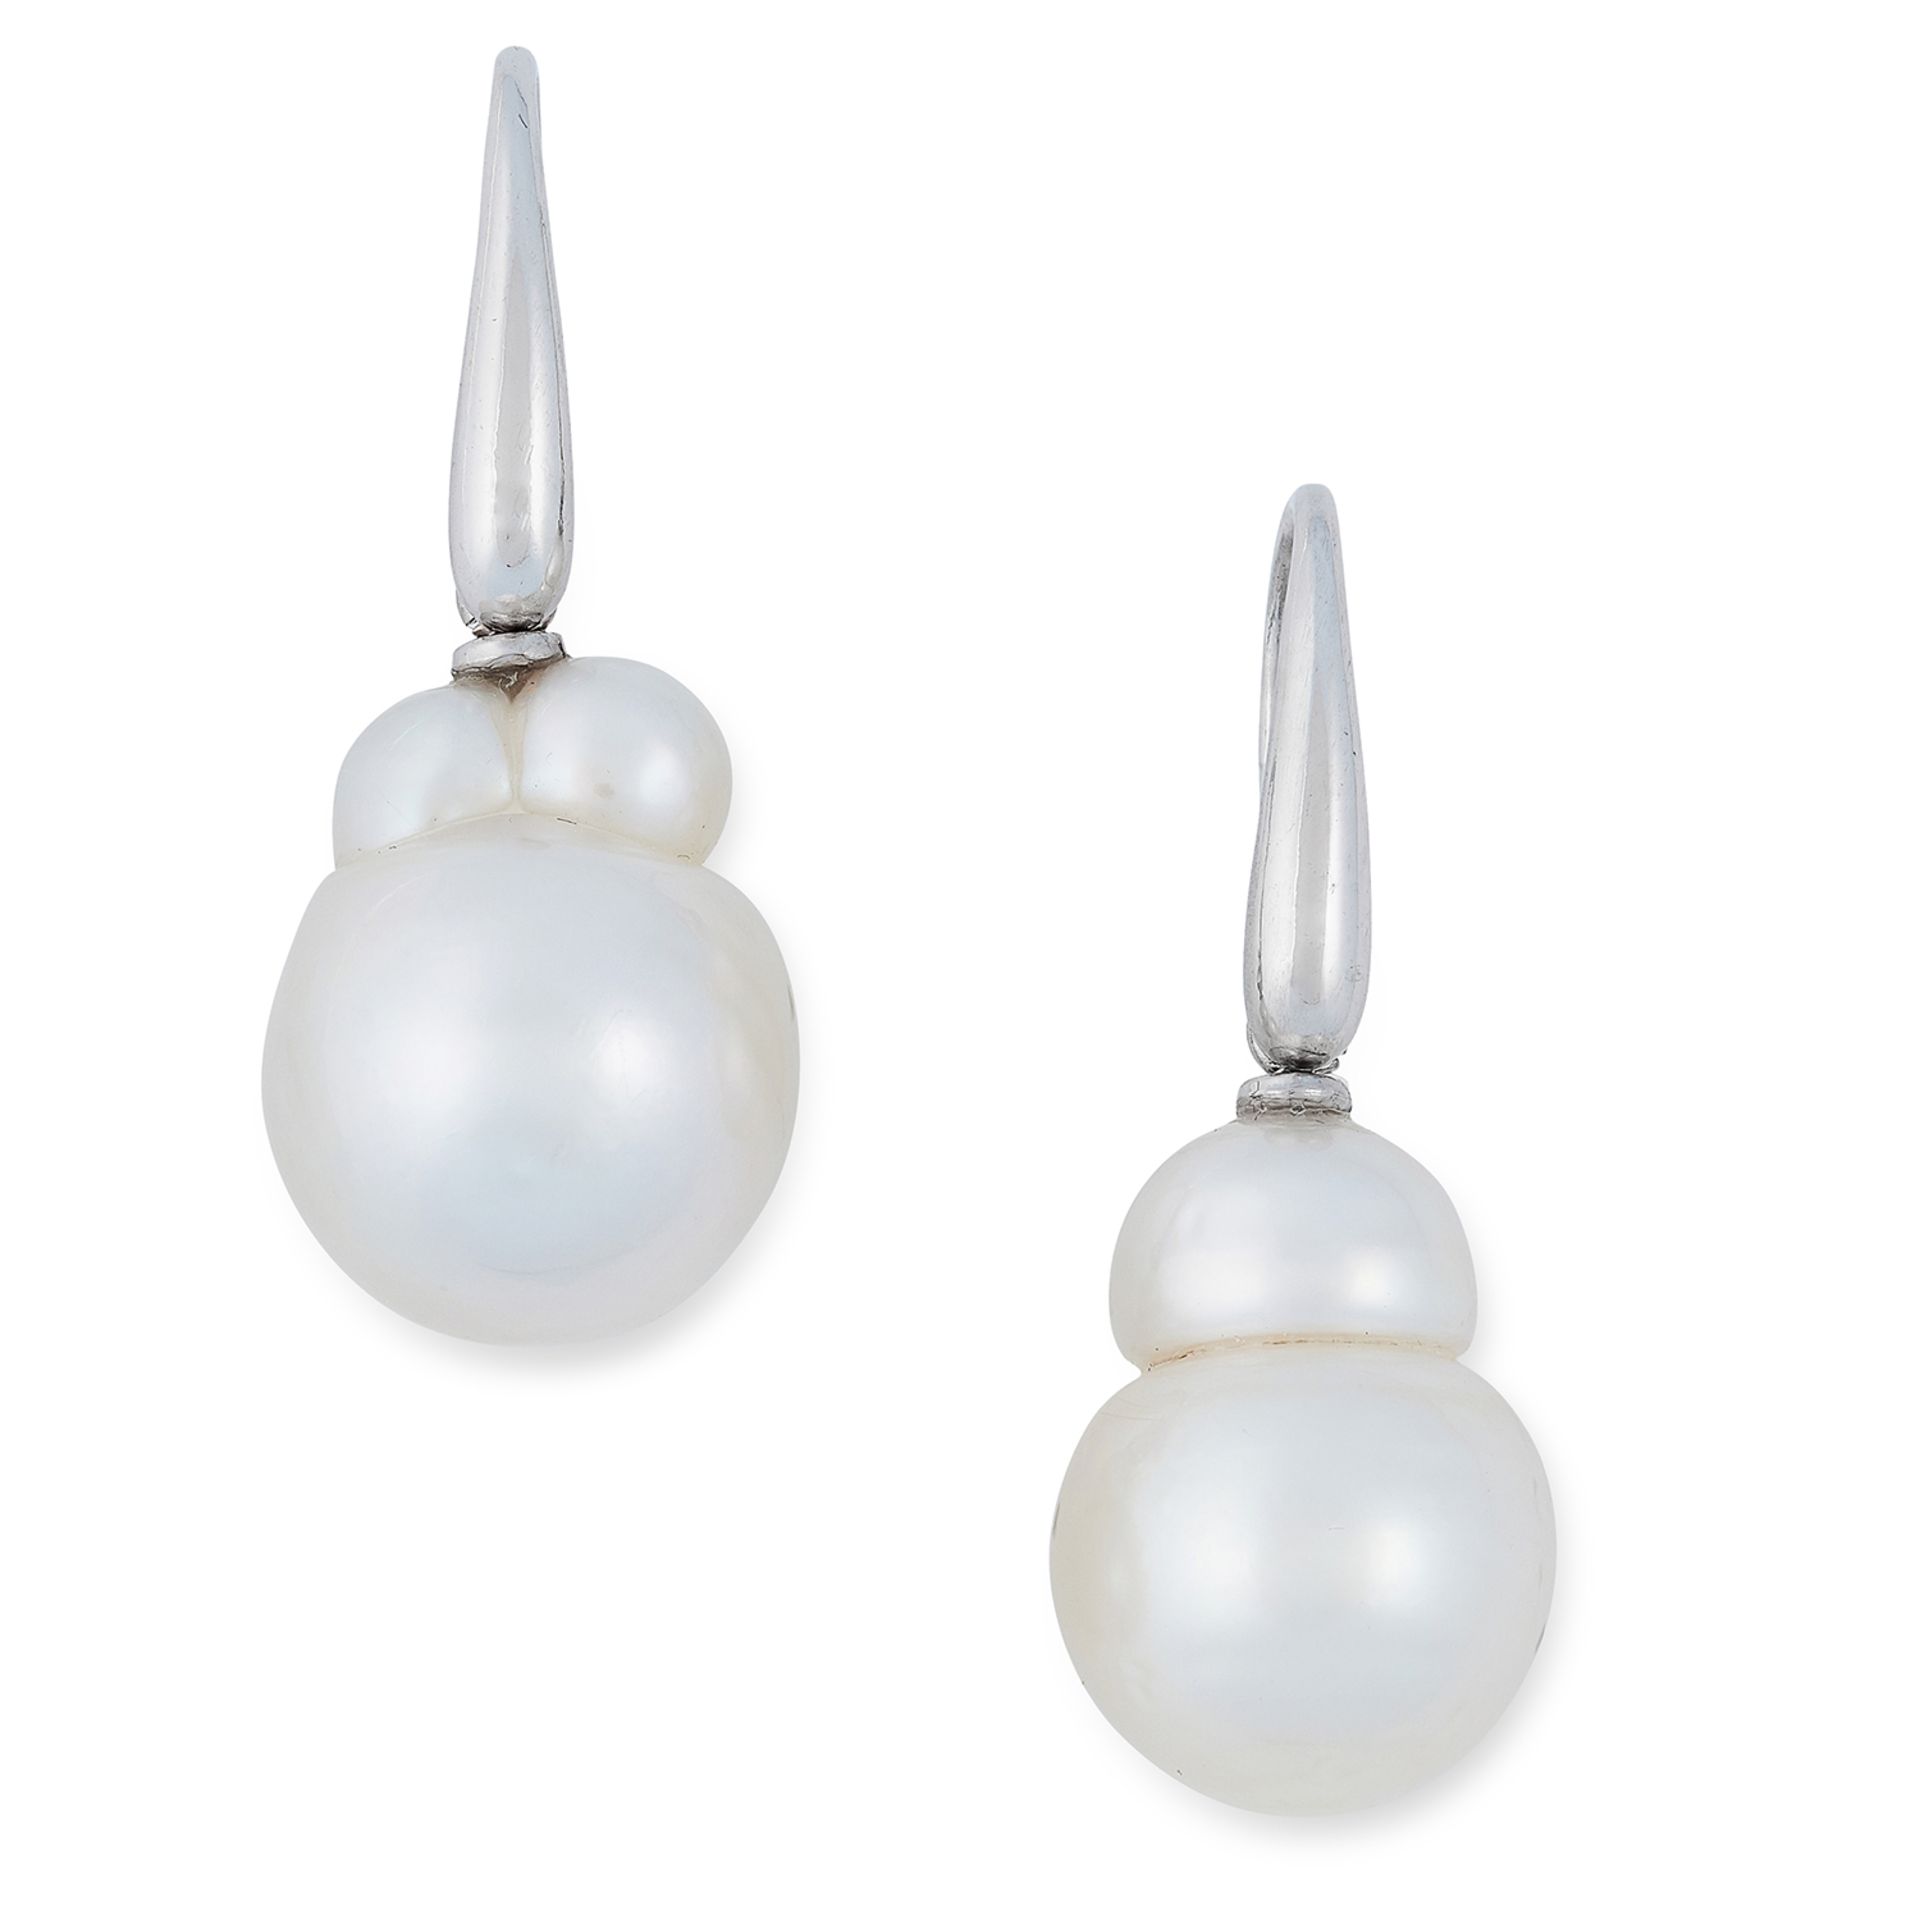 PEARL DROP EARRINGS each set with a baroque pearl, 3.3cm, 9.6g.